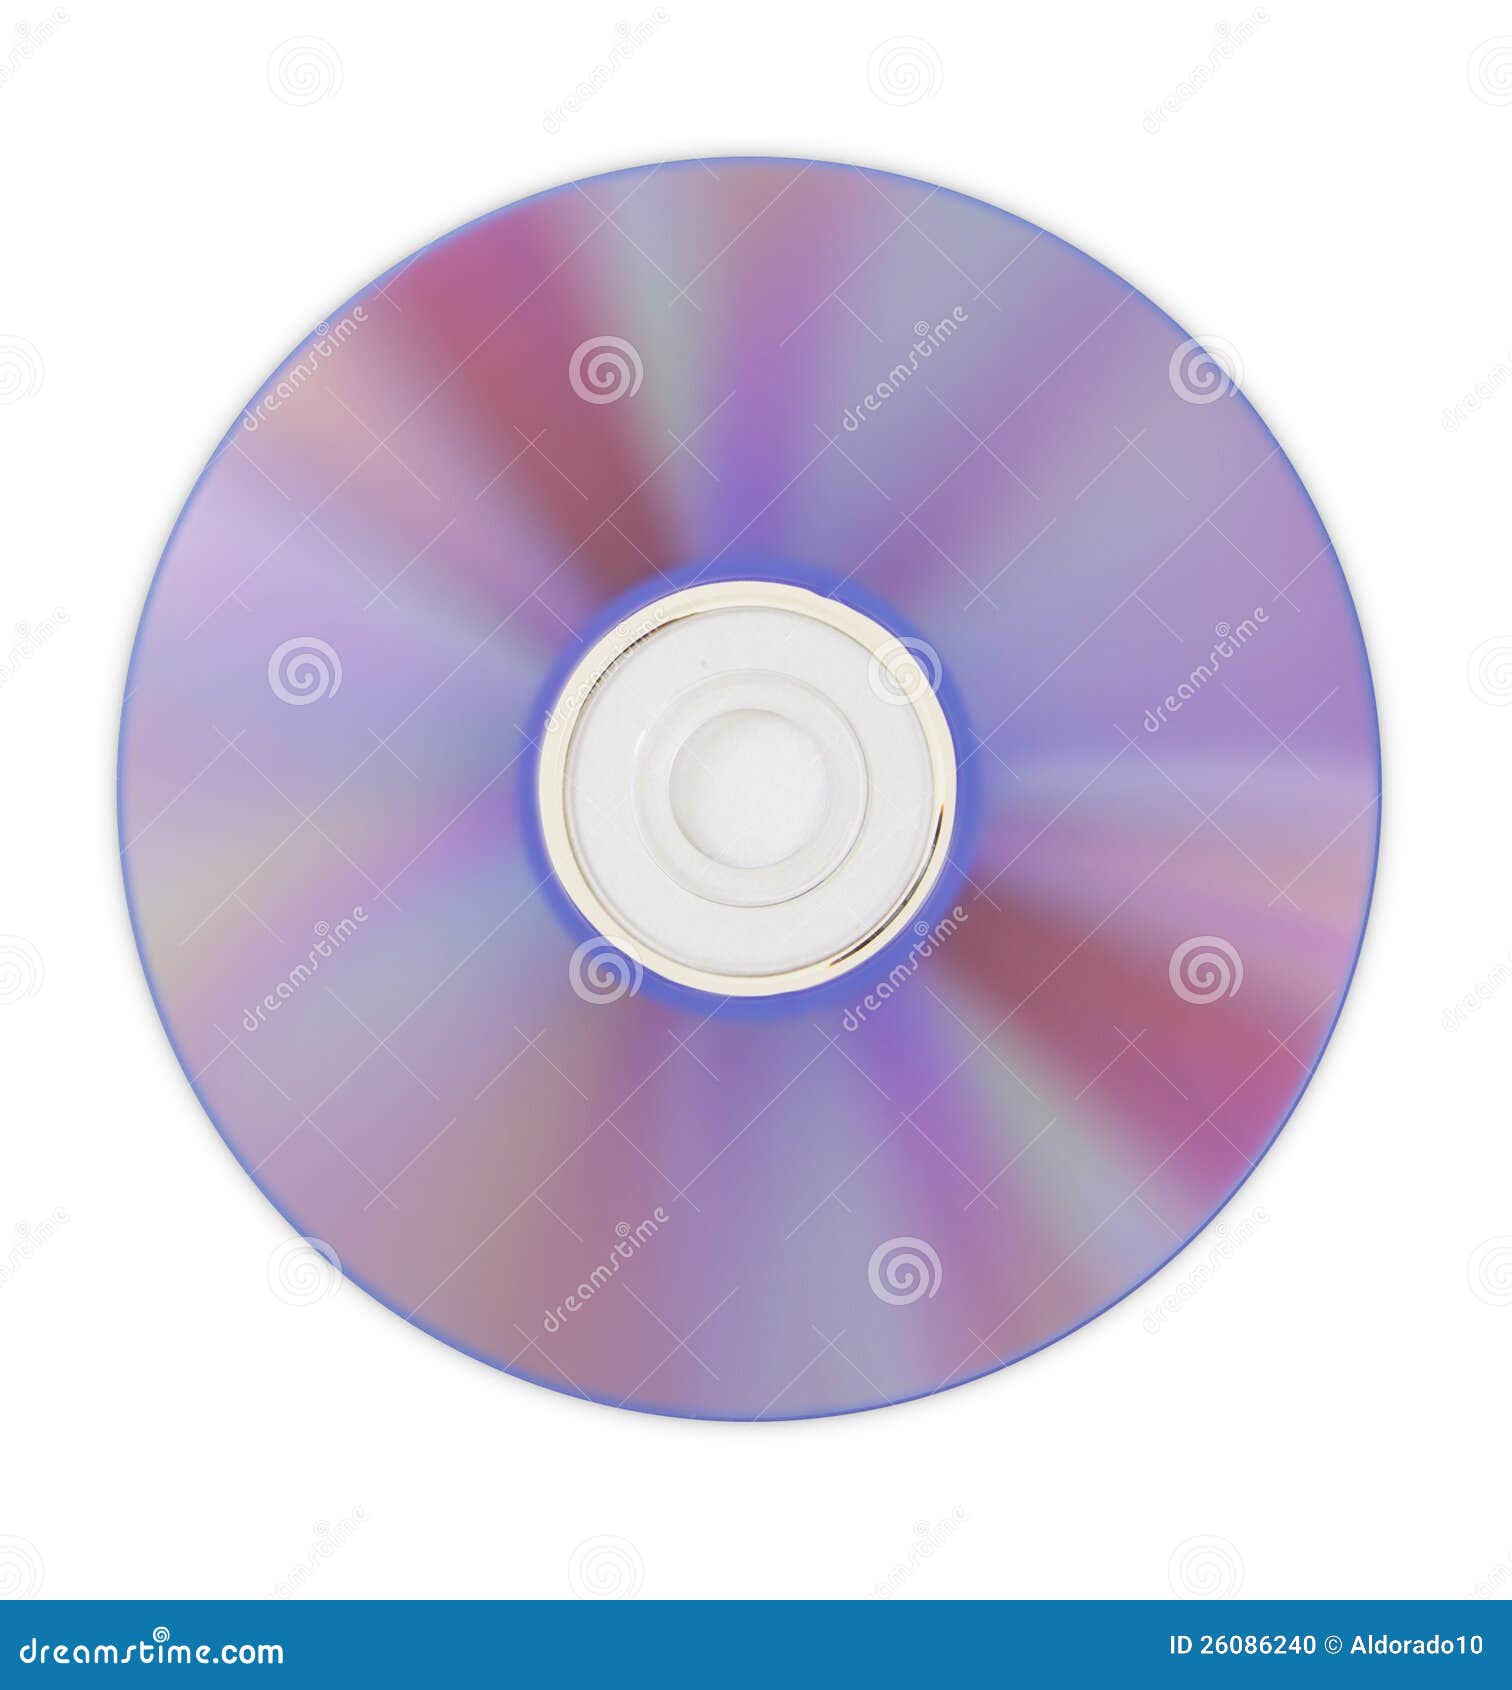 CD DVD Bluray stock photo. Image of color, background - 26086240